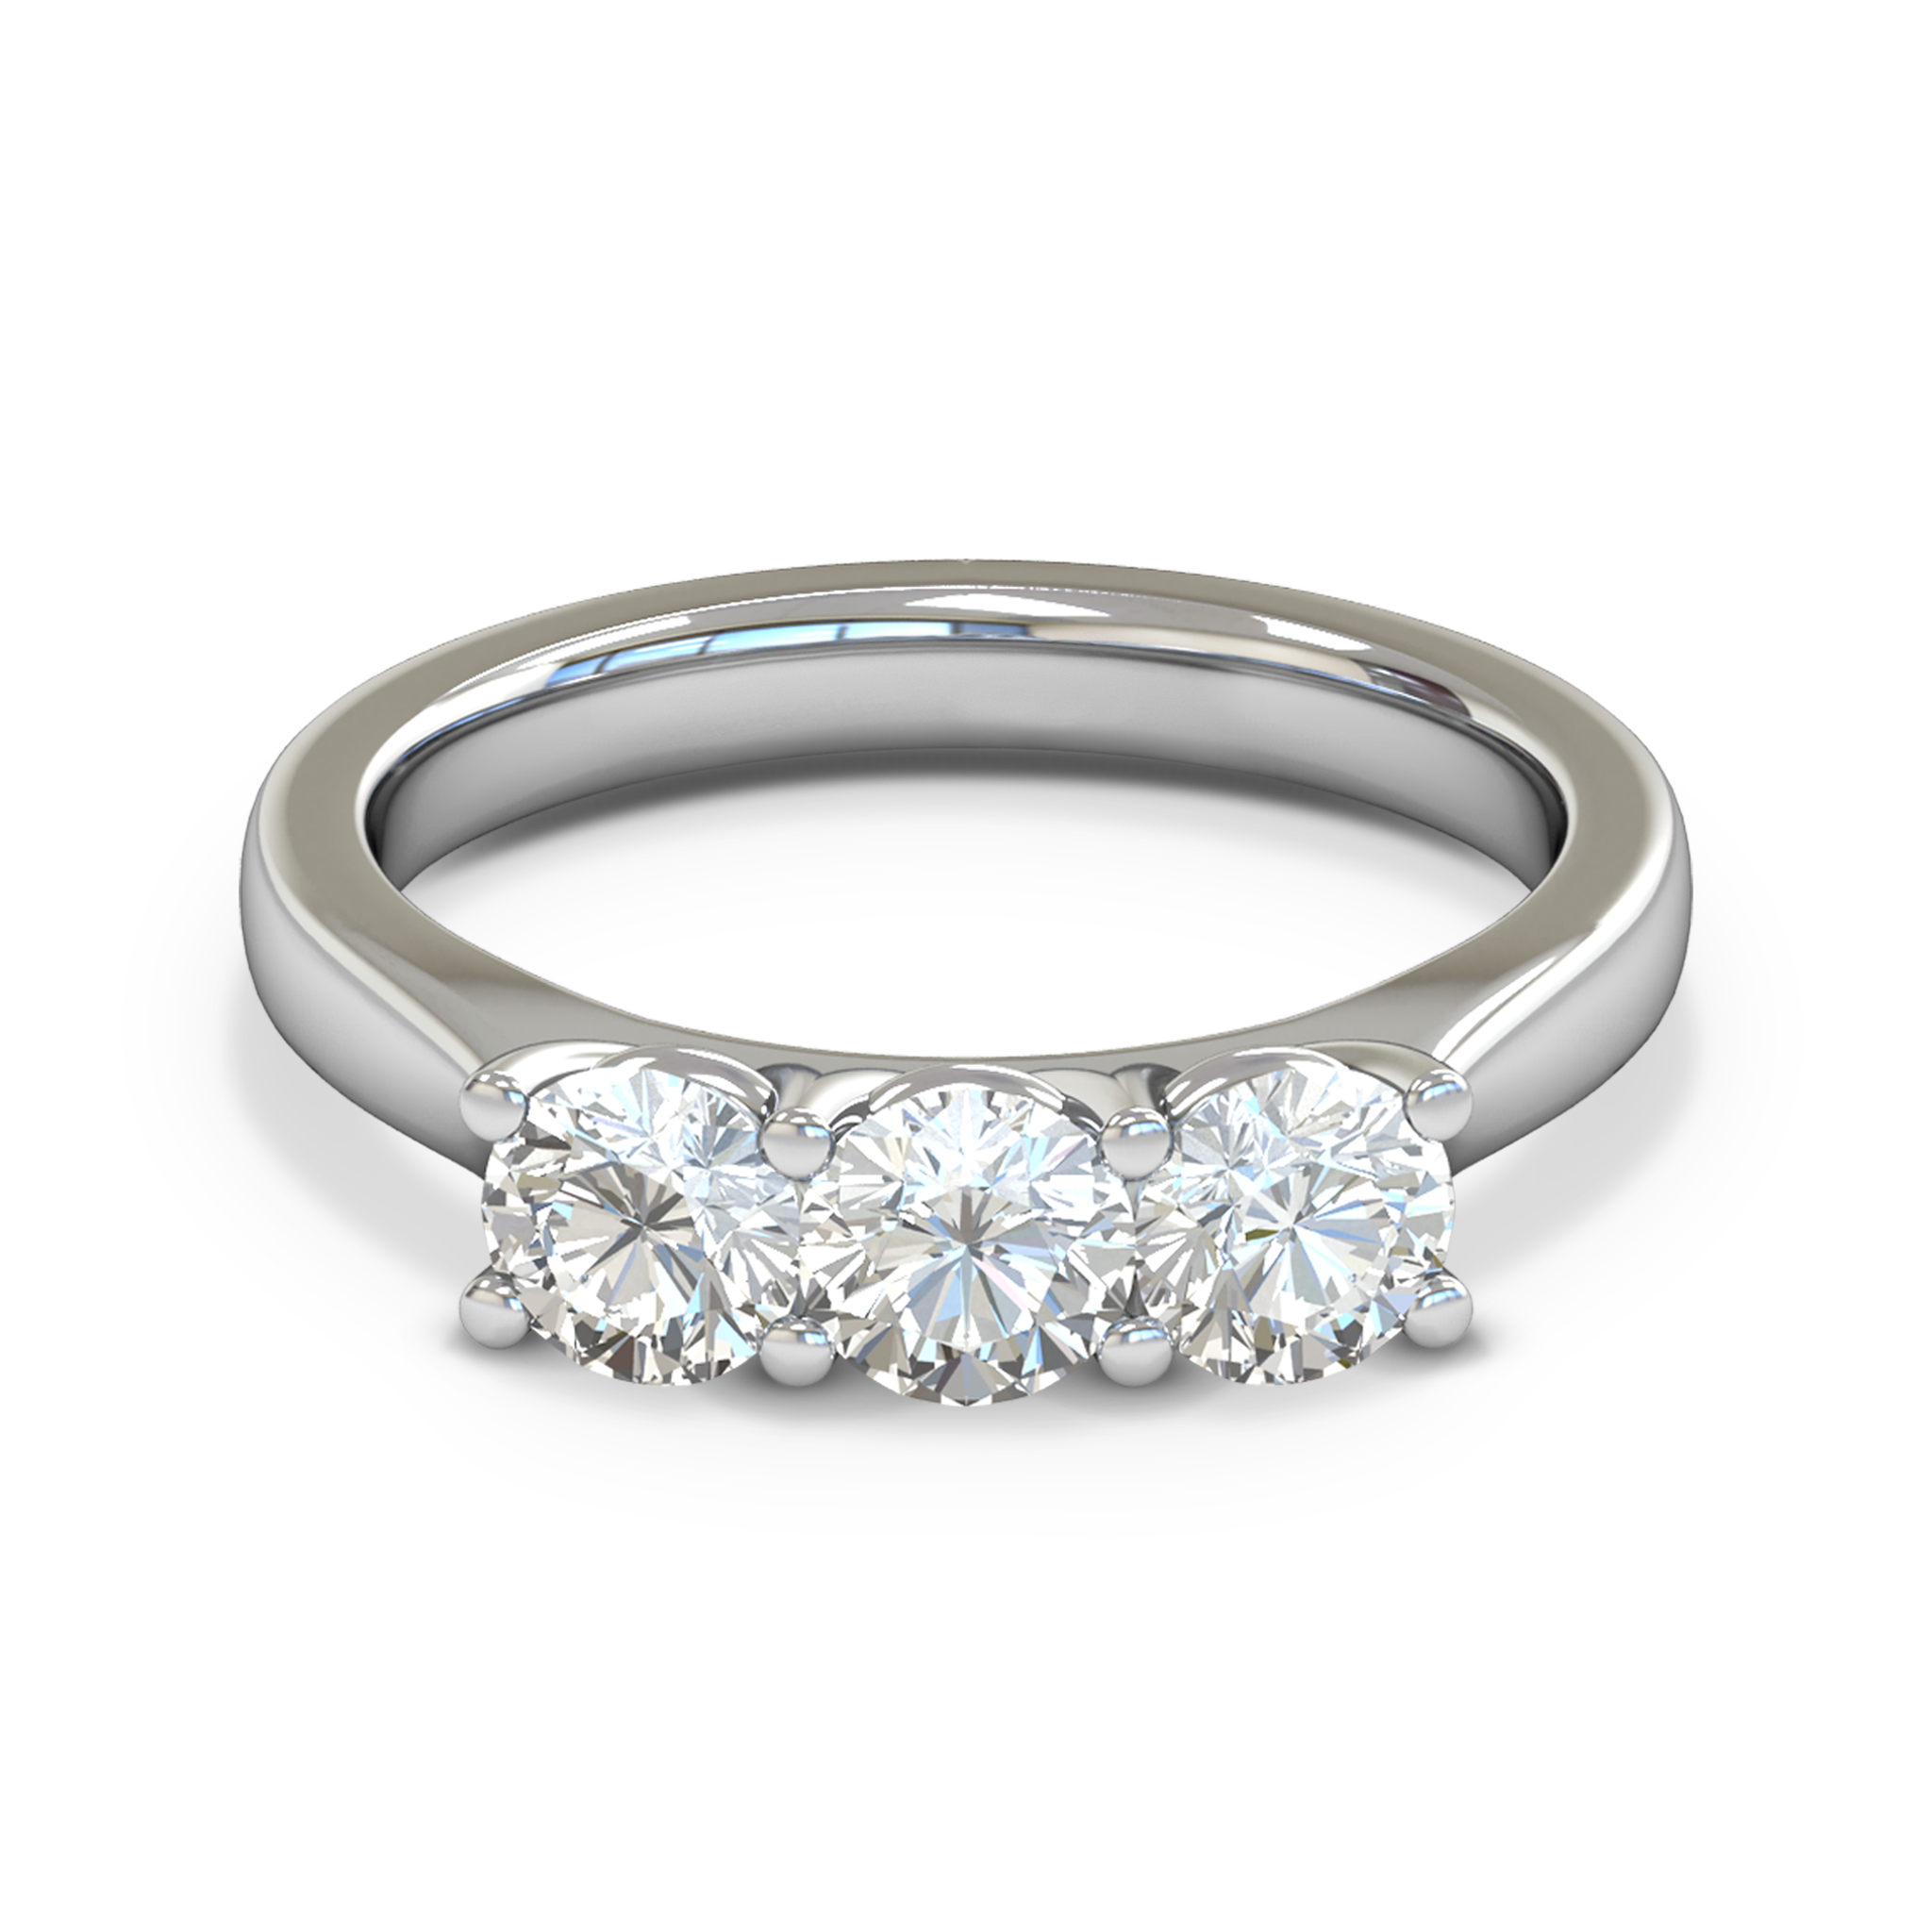 Trilogy Tapered Diamond Fairtrade Gold Engagement Ring in 18K White Fairtrade Gold